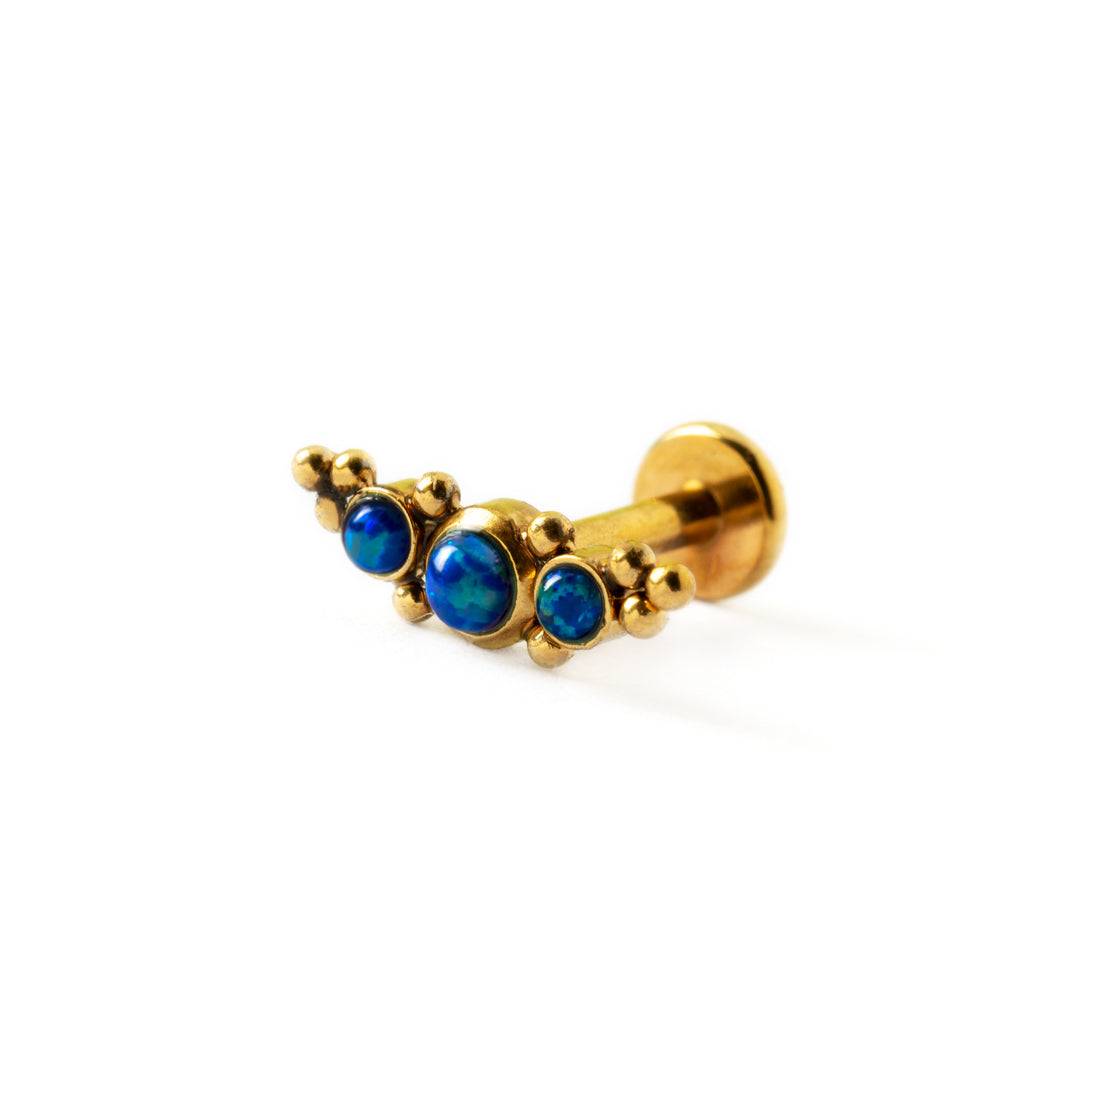 Copy of Deva Golden Labret with Blue Opal right side view